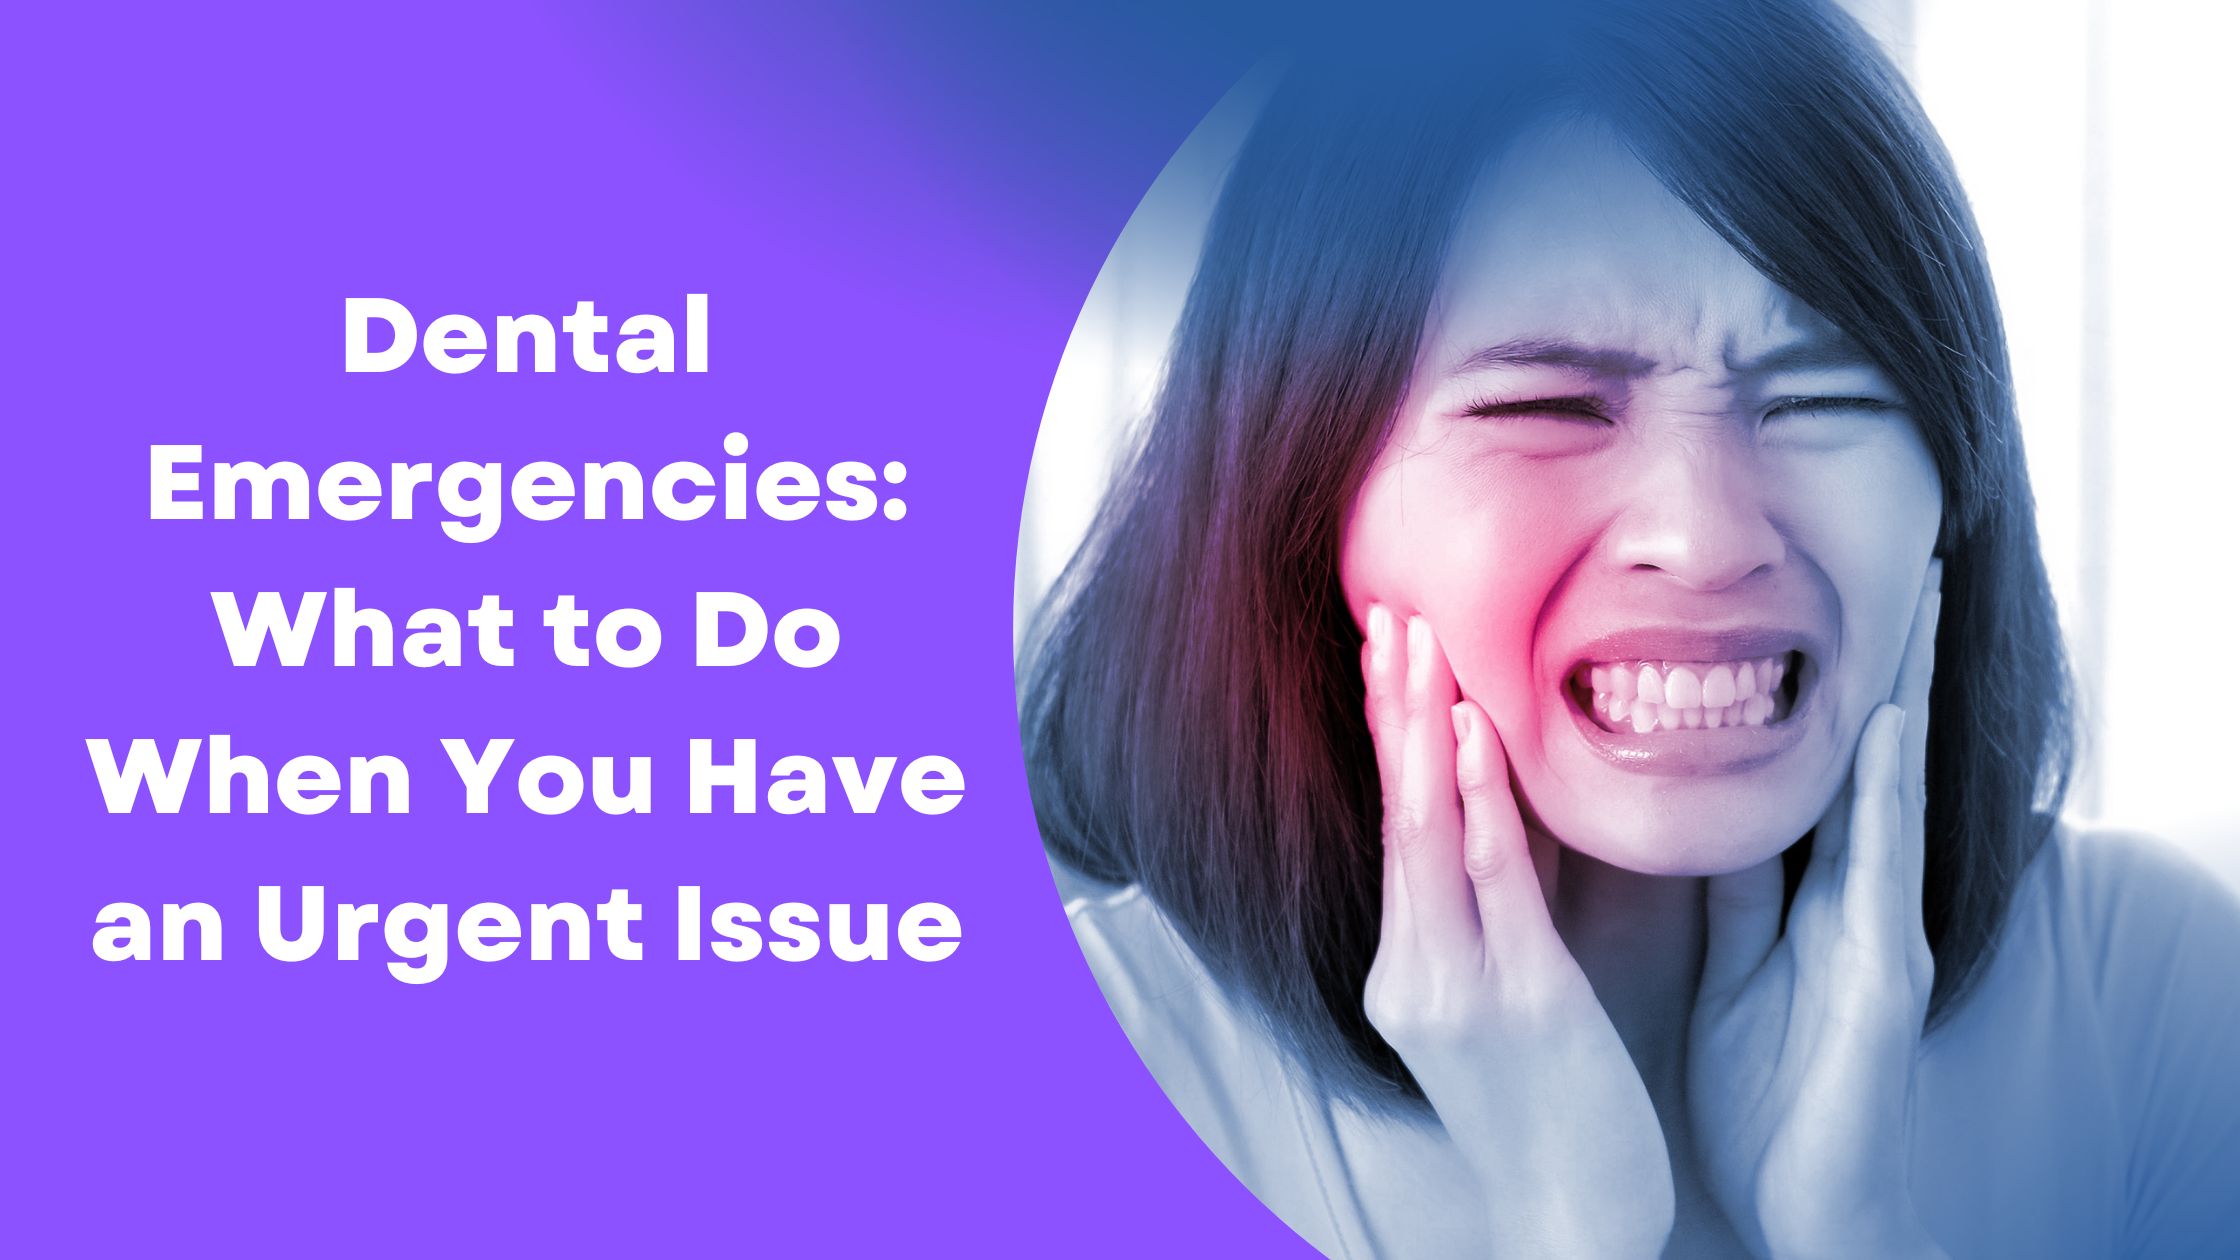 Dental Emergencies: What to Do When You Have an Urgent Issue